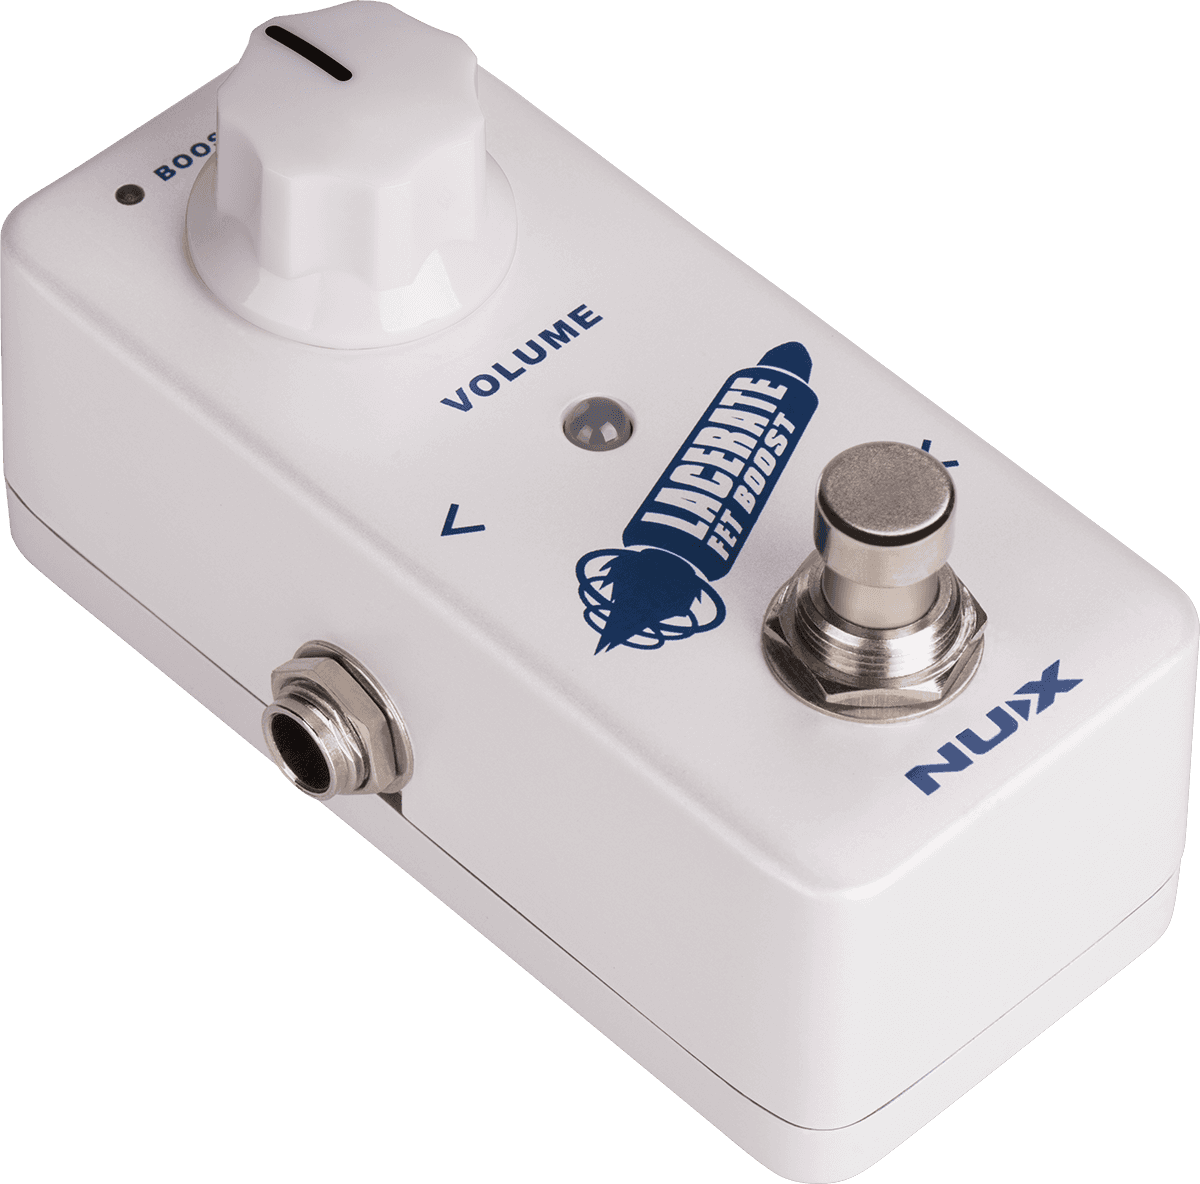 Nux Lacerate Boost Fet - Volume, boost & expression effect pedal - Variation 1